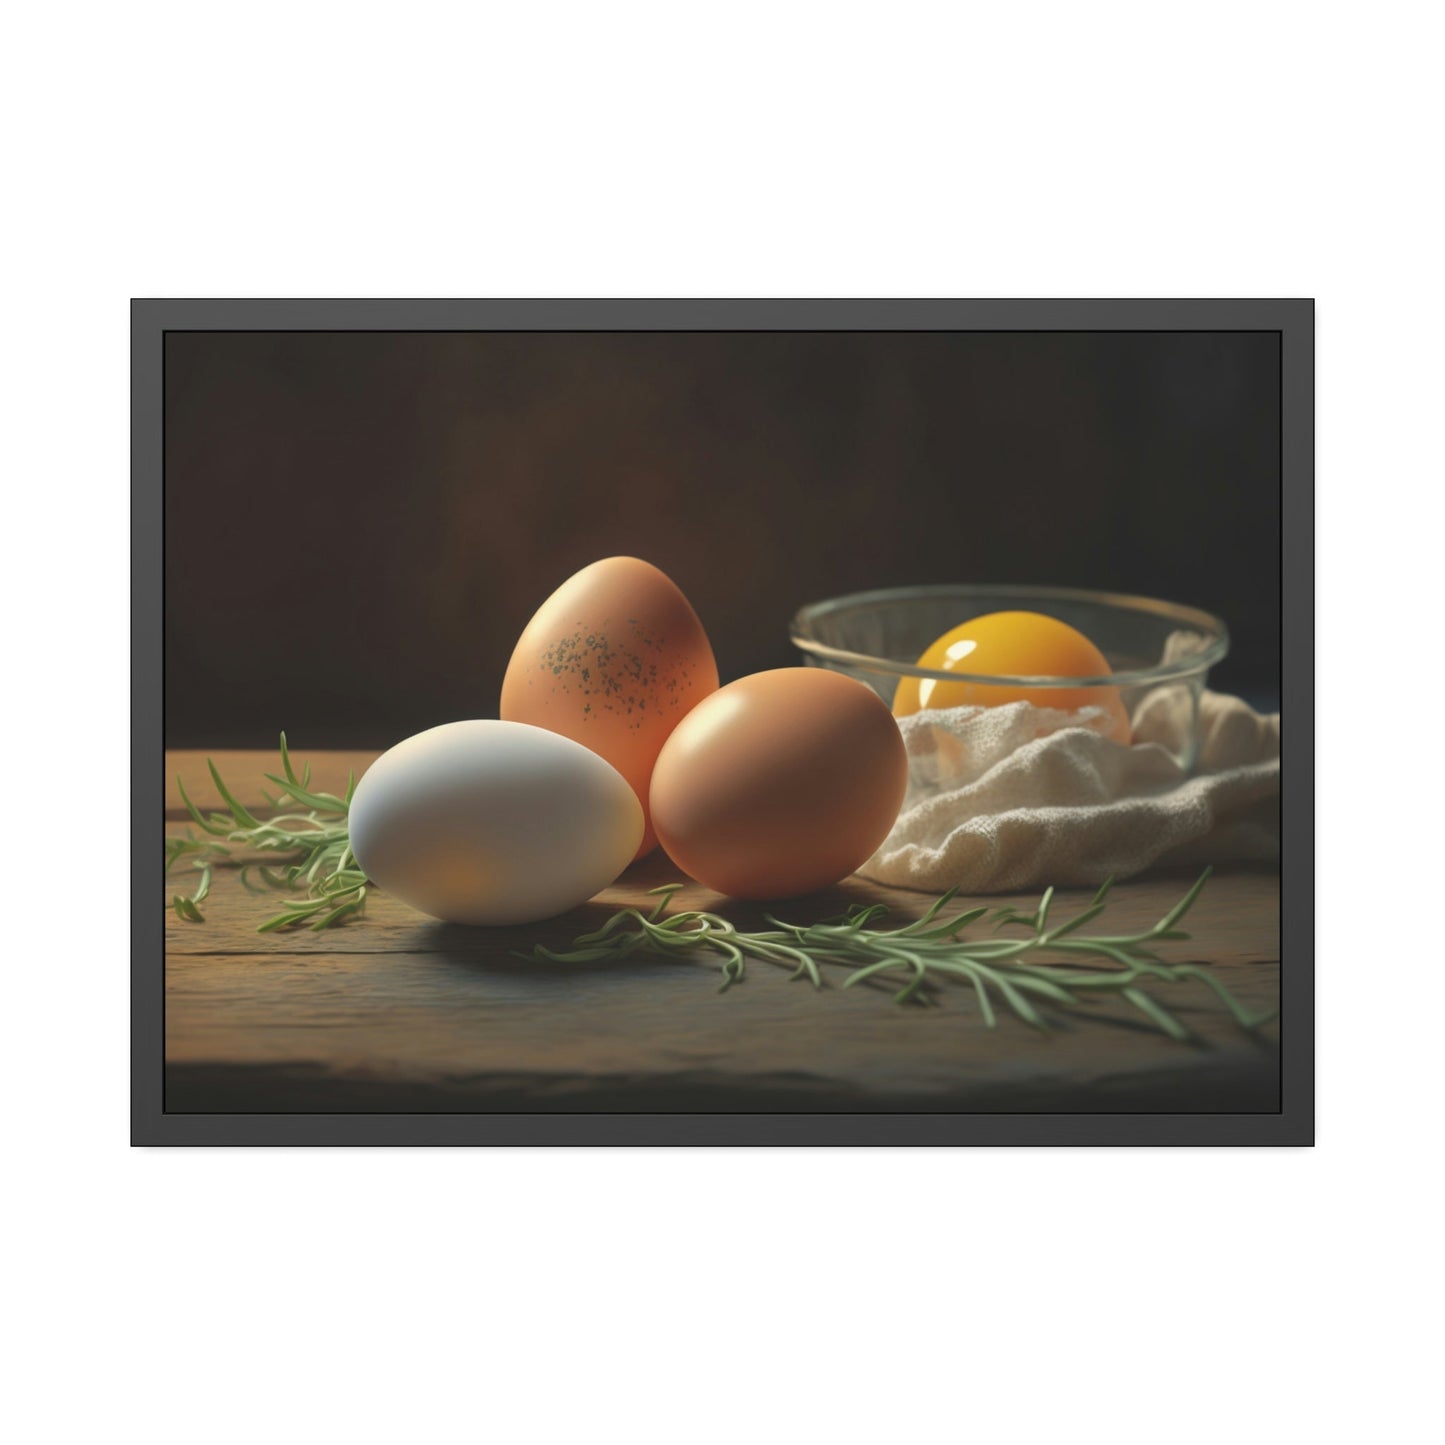 Eggstract Shapes: A Contemporary Painting of Geometric Forms Featuring Eggs